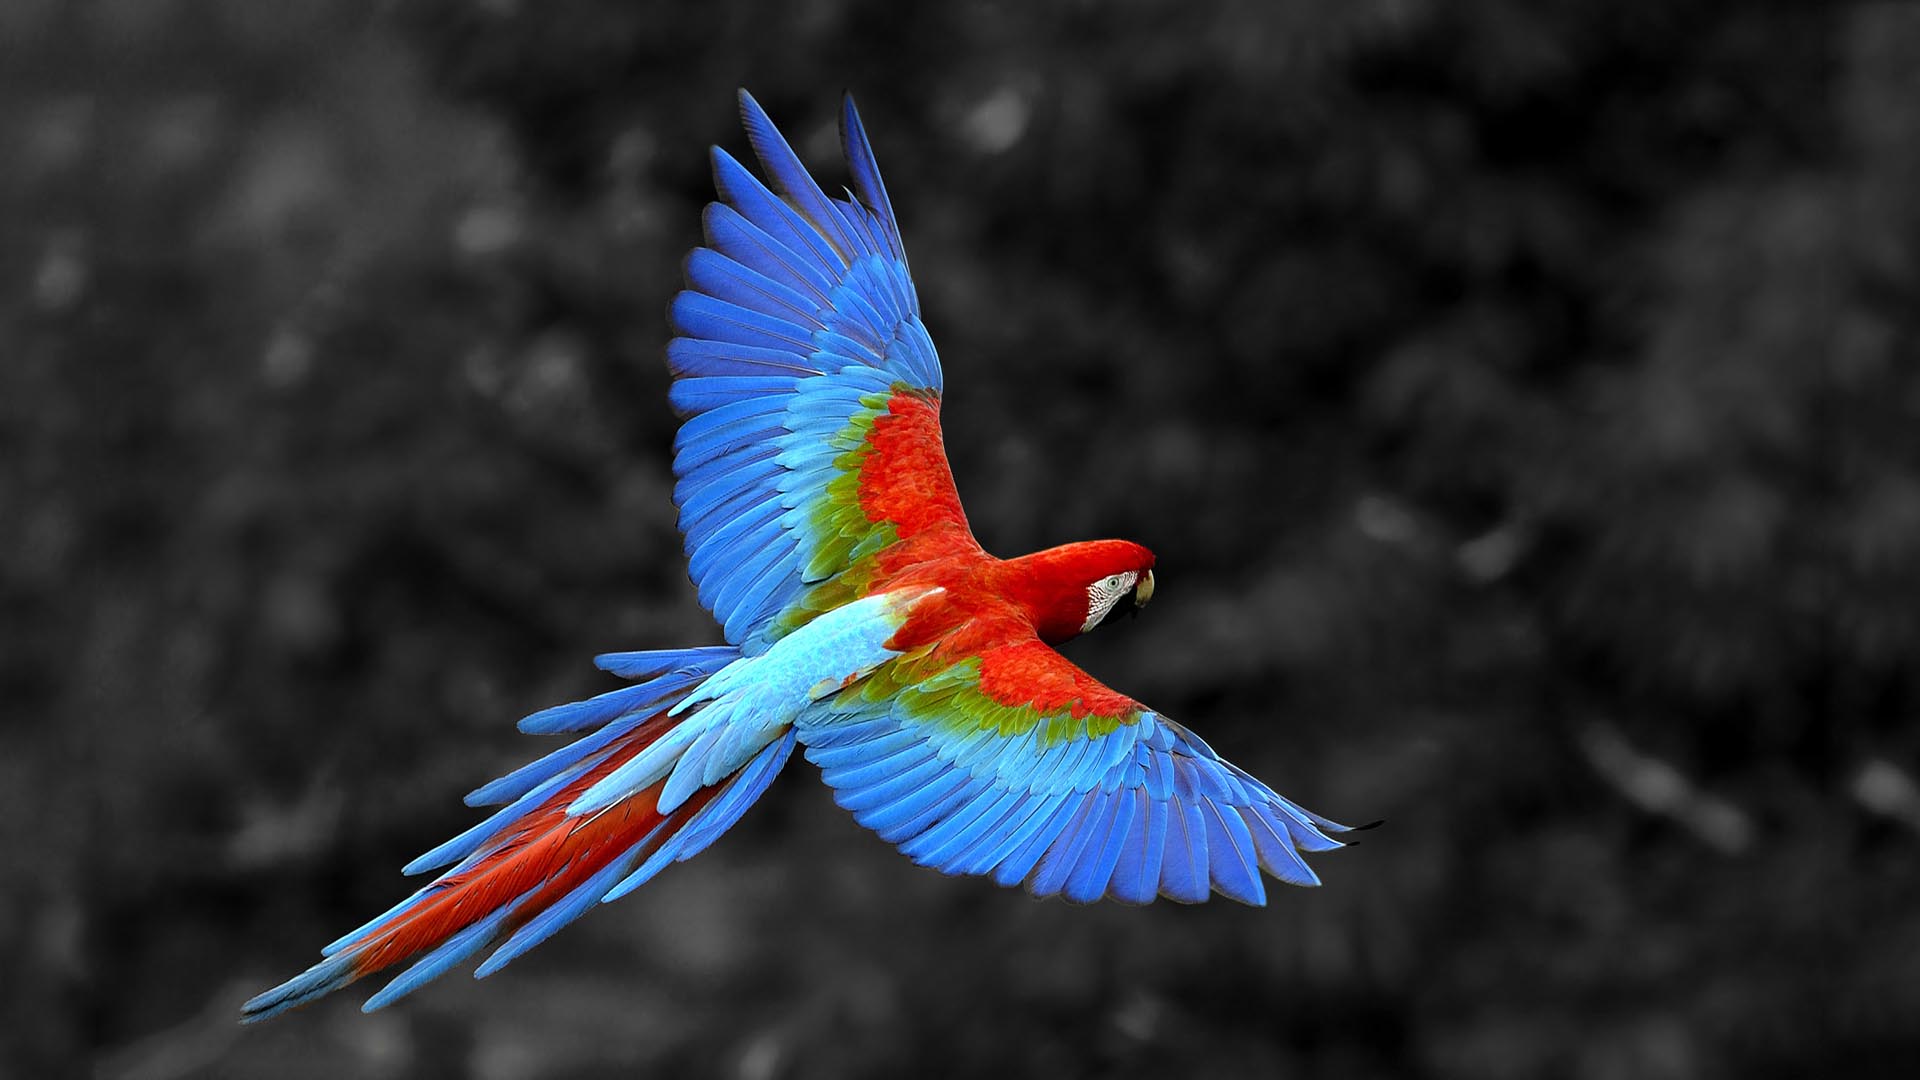 Macaw Colors Hd Wallpaper - Flying Green Wing Macaw - 1920x1080 Wallpaper -  